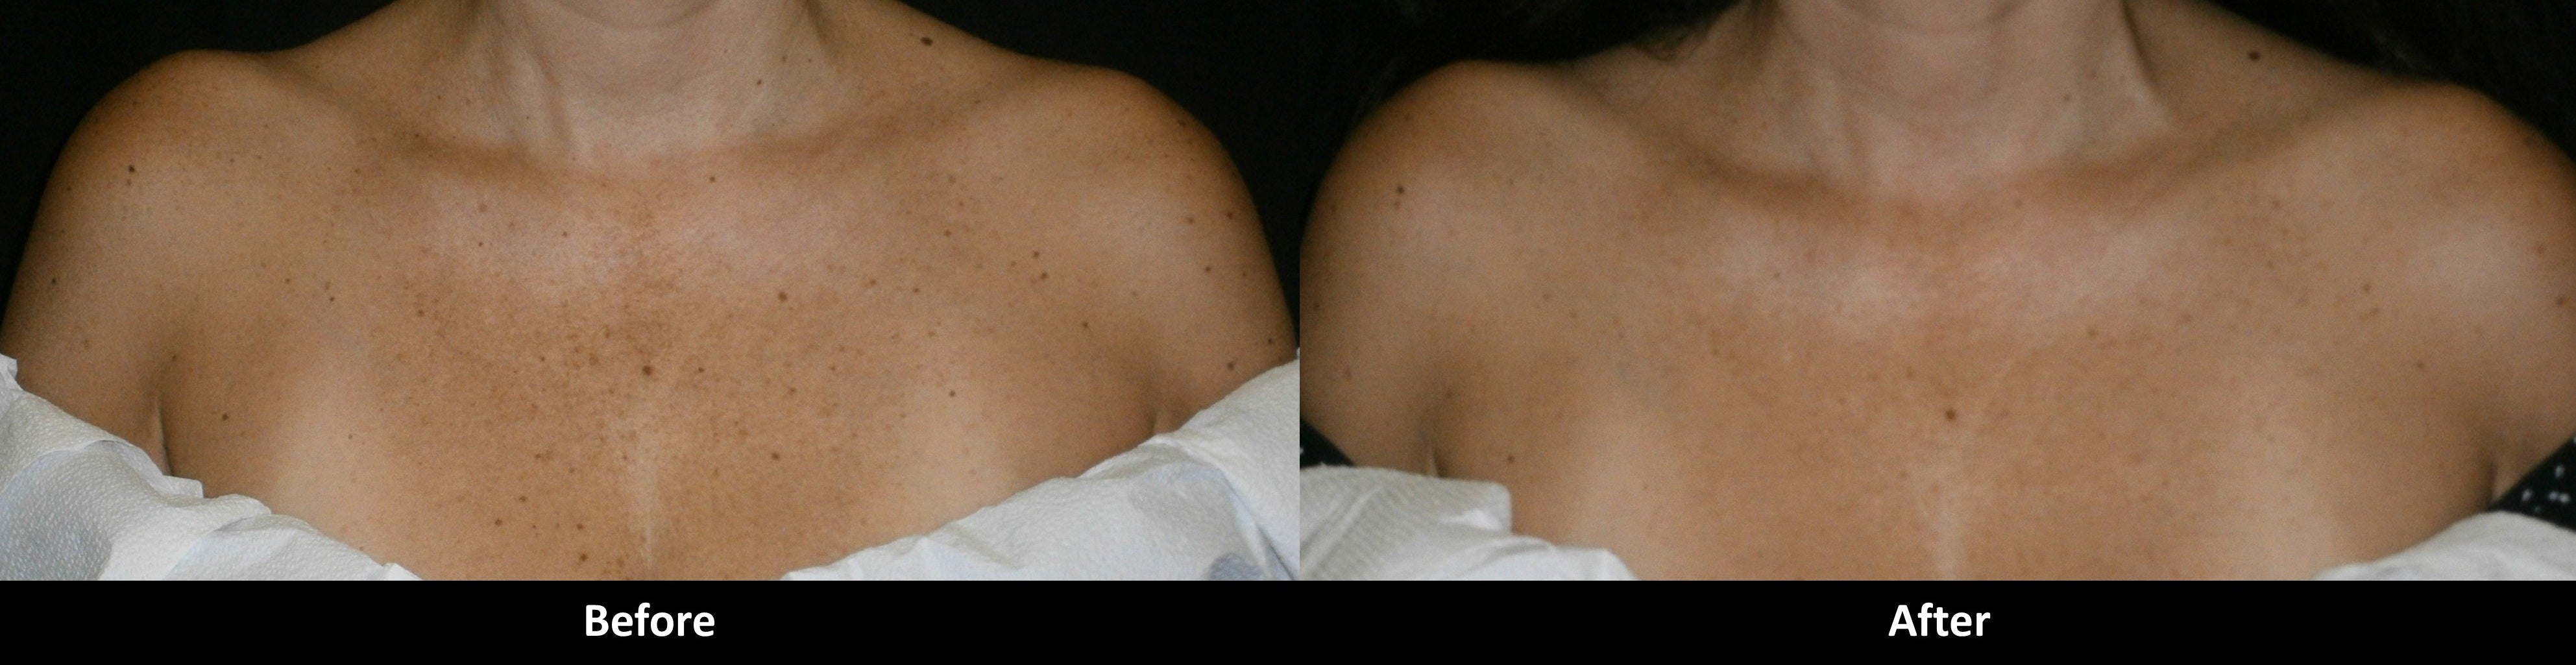 IPL photofacial before and after